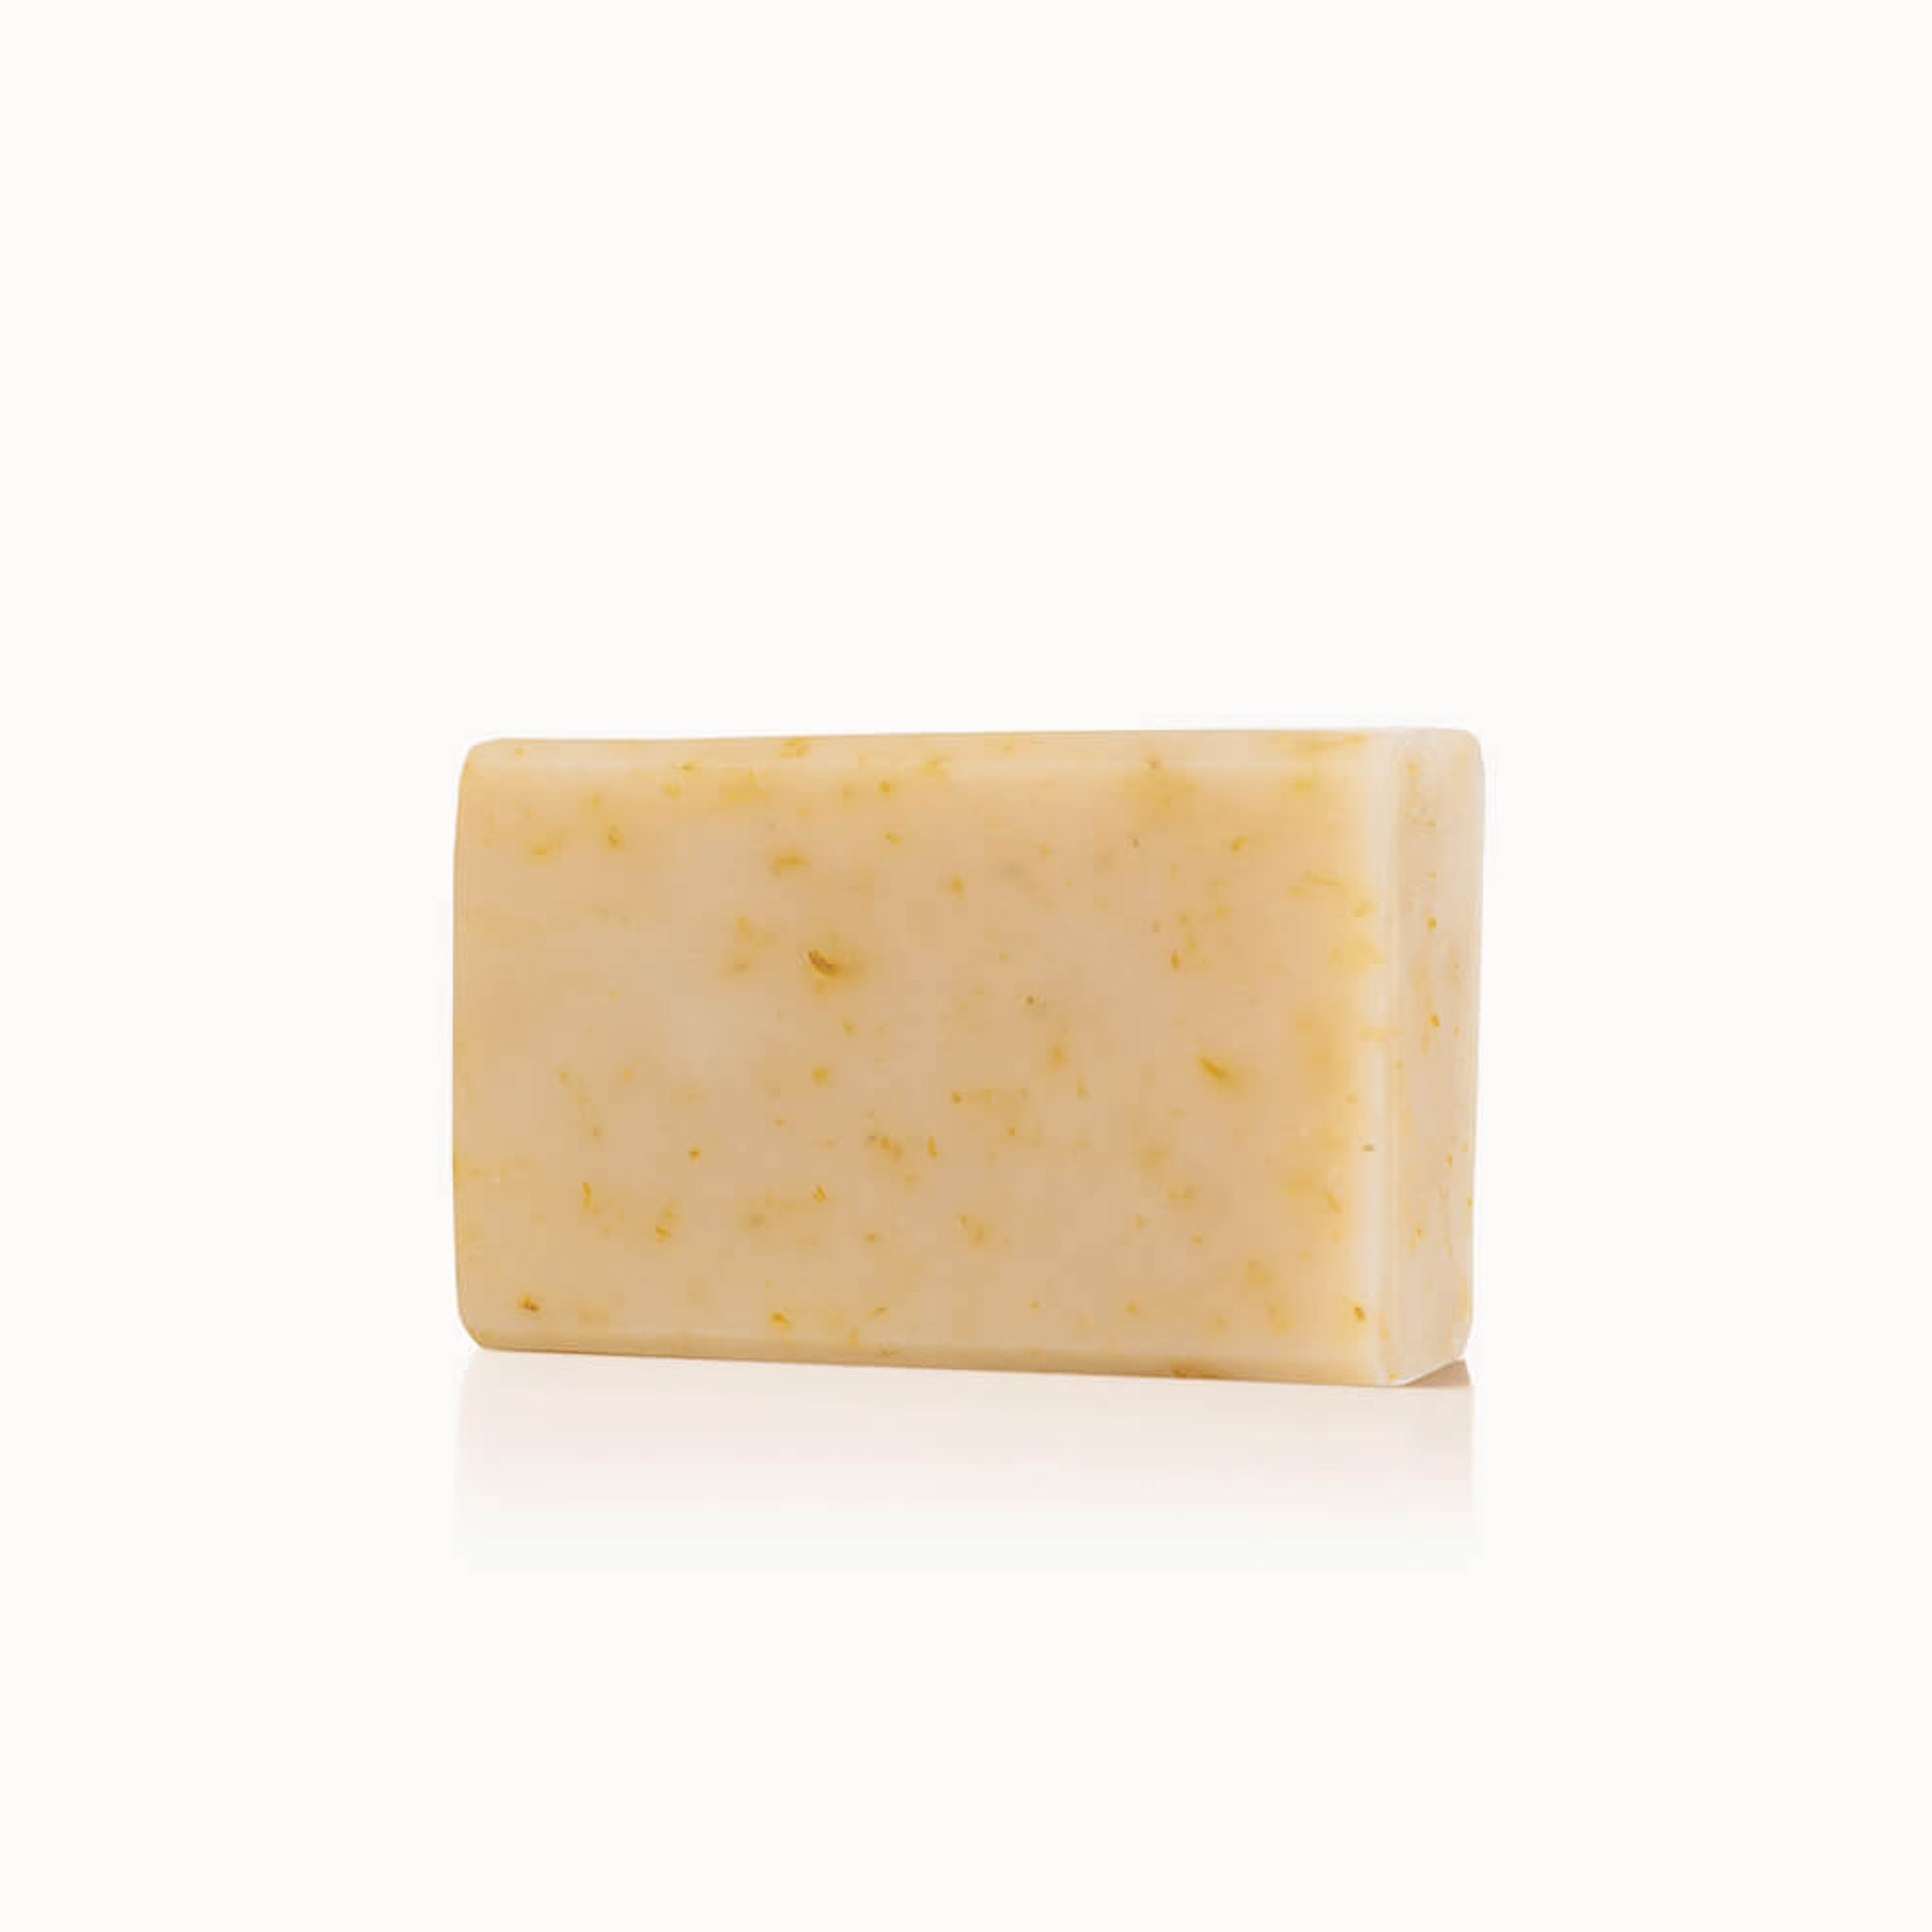 Image of a swipe of the Bia unscented bar soap on a white background.